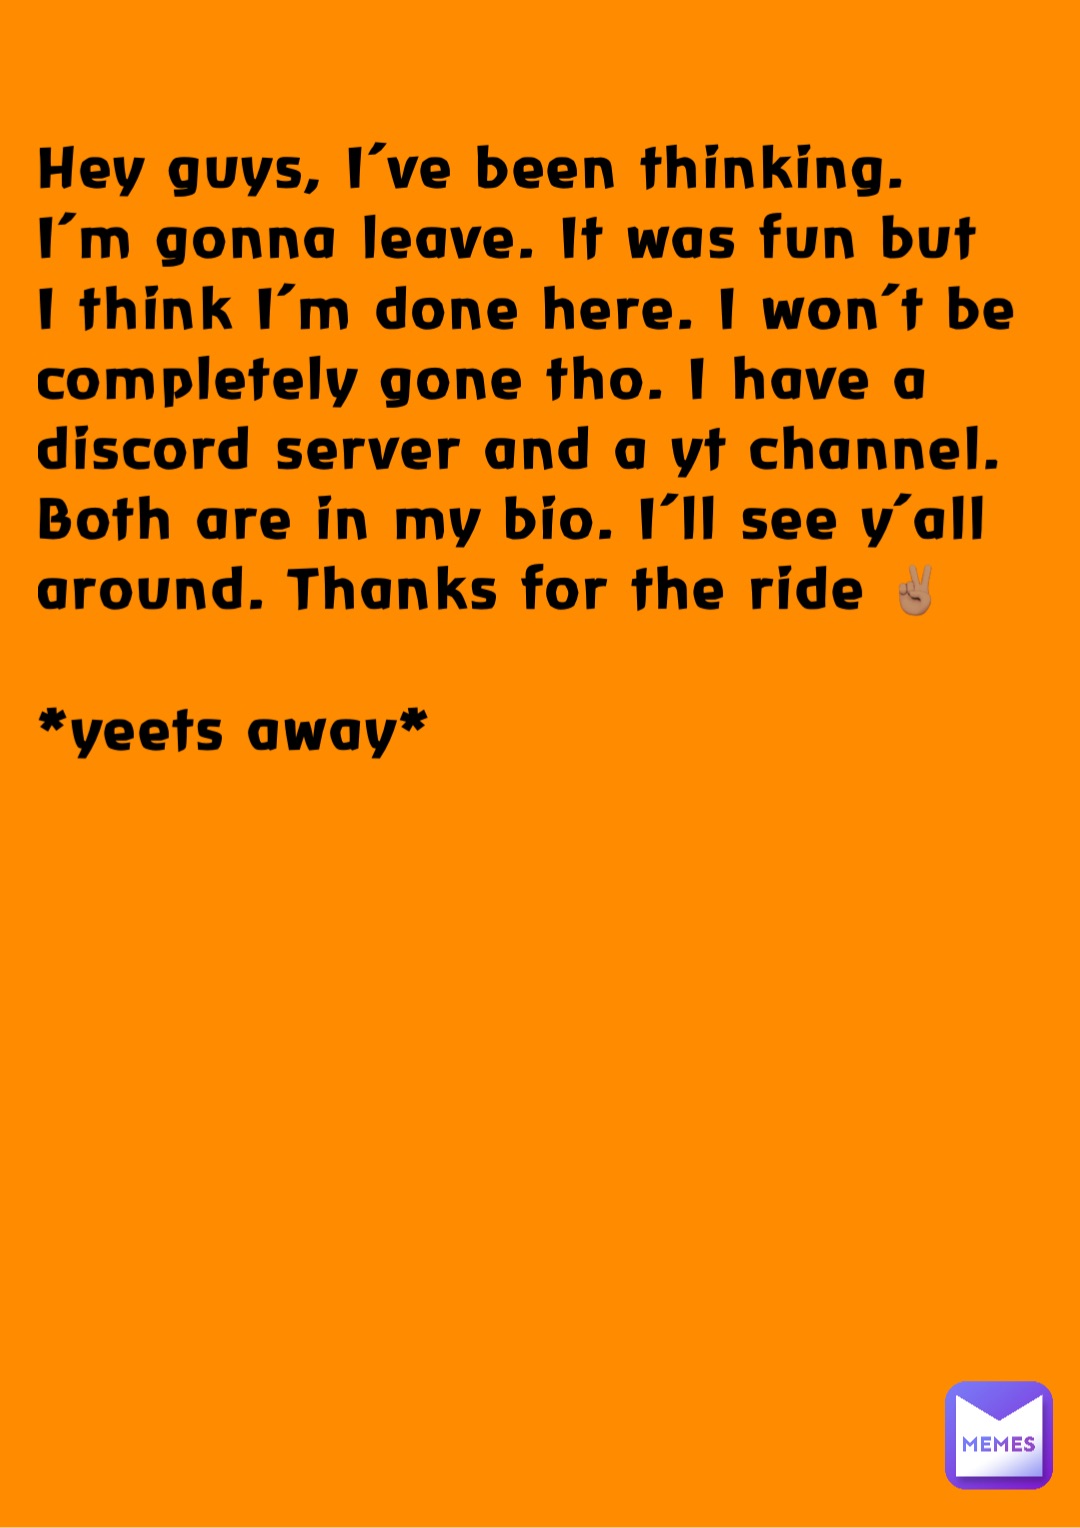 Hey guys, I’ve been thinking. I’m gonna leave. It was fun but I think I’m done here. I won’t be completely gone tho. I have a discord server and a yt channel. Both are in my bio. I’ll see y’all around. Thanks for the ride ✌🏽 

*yeets away*